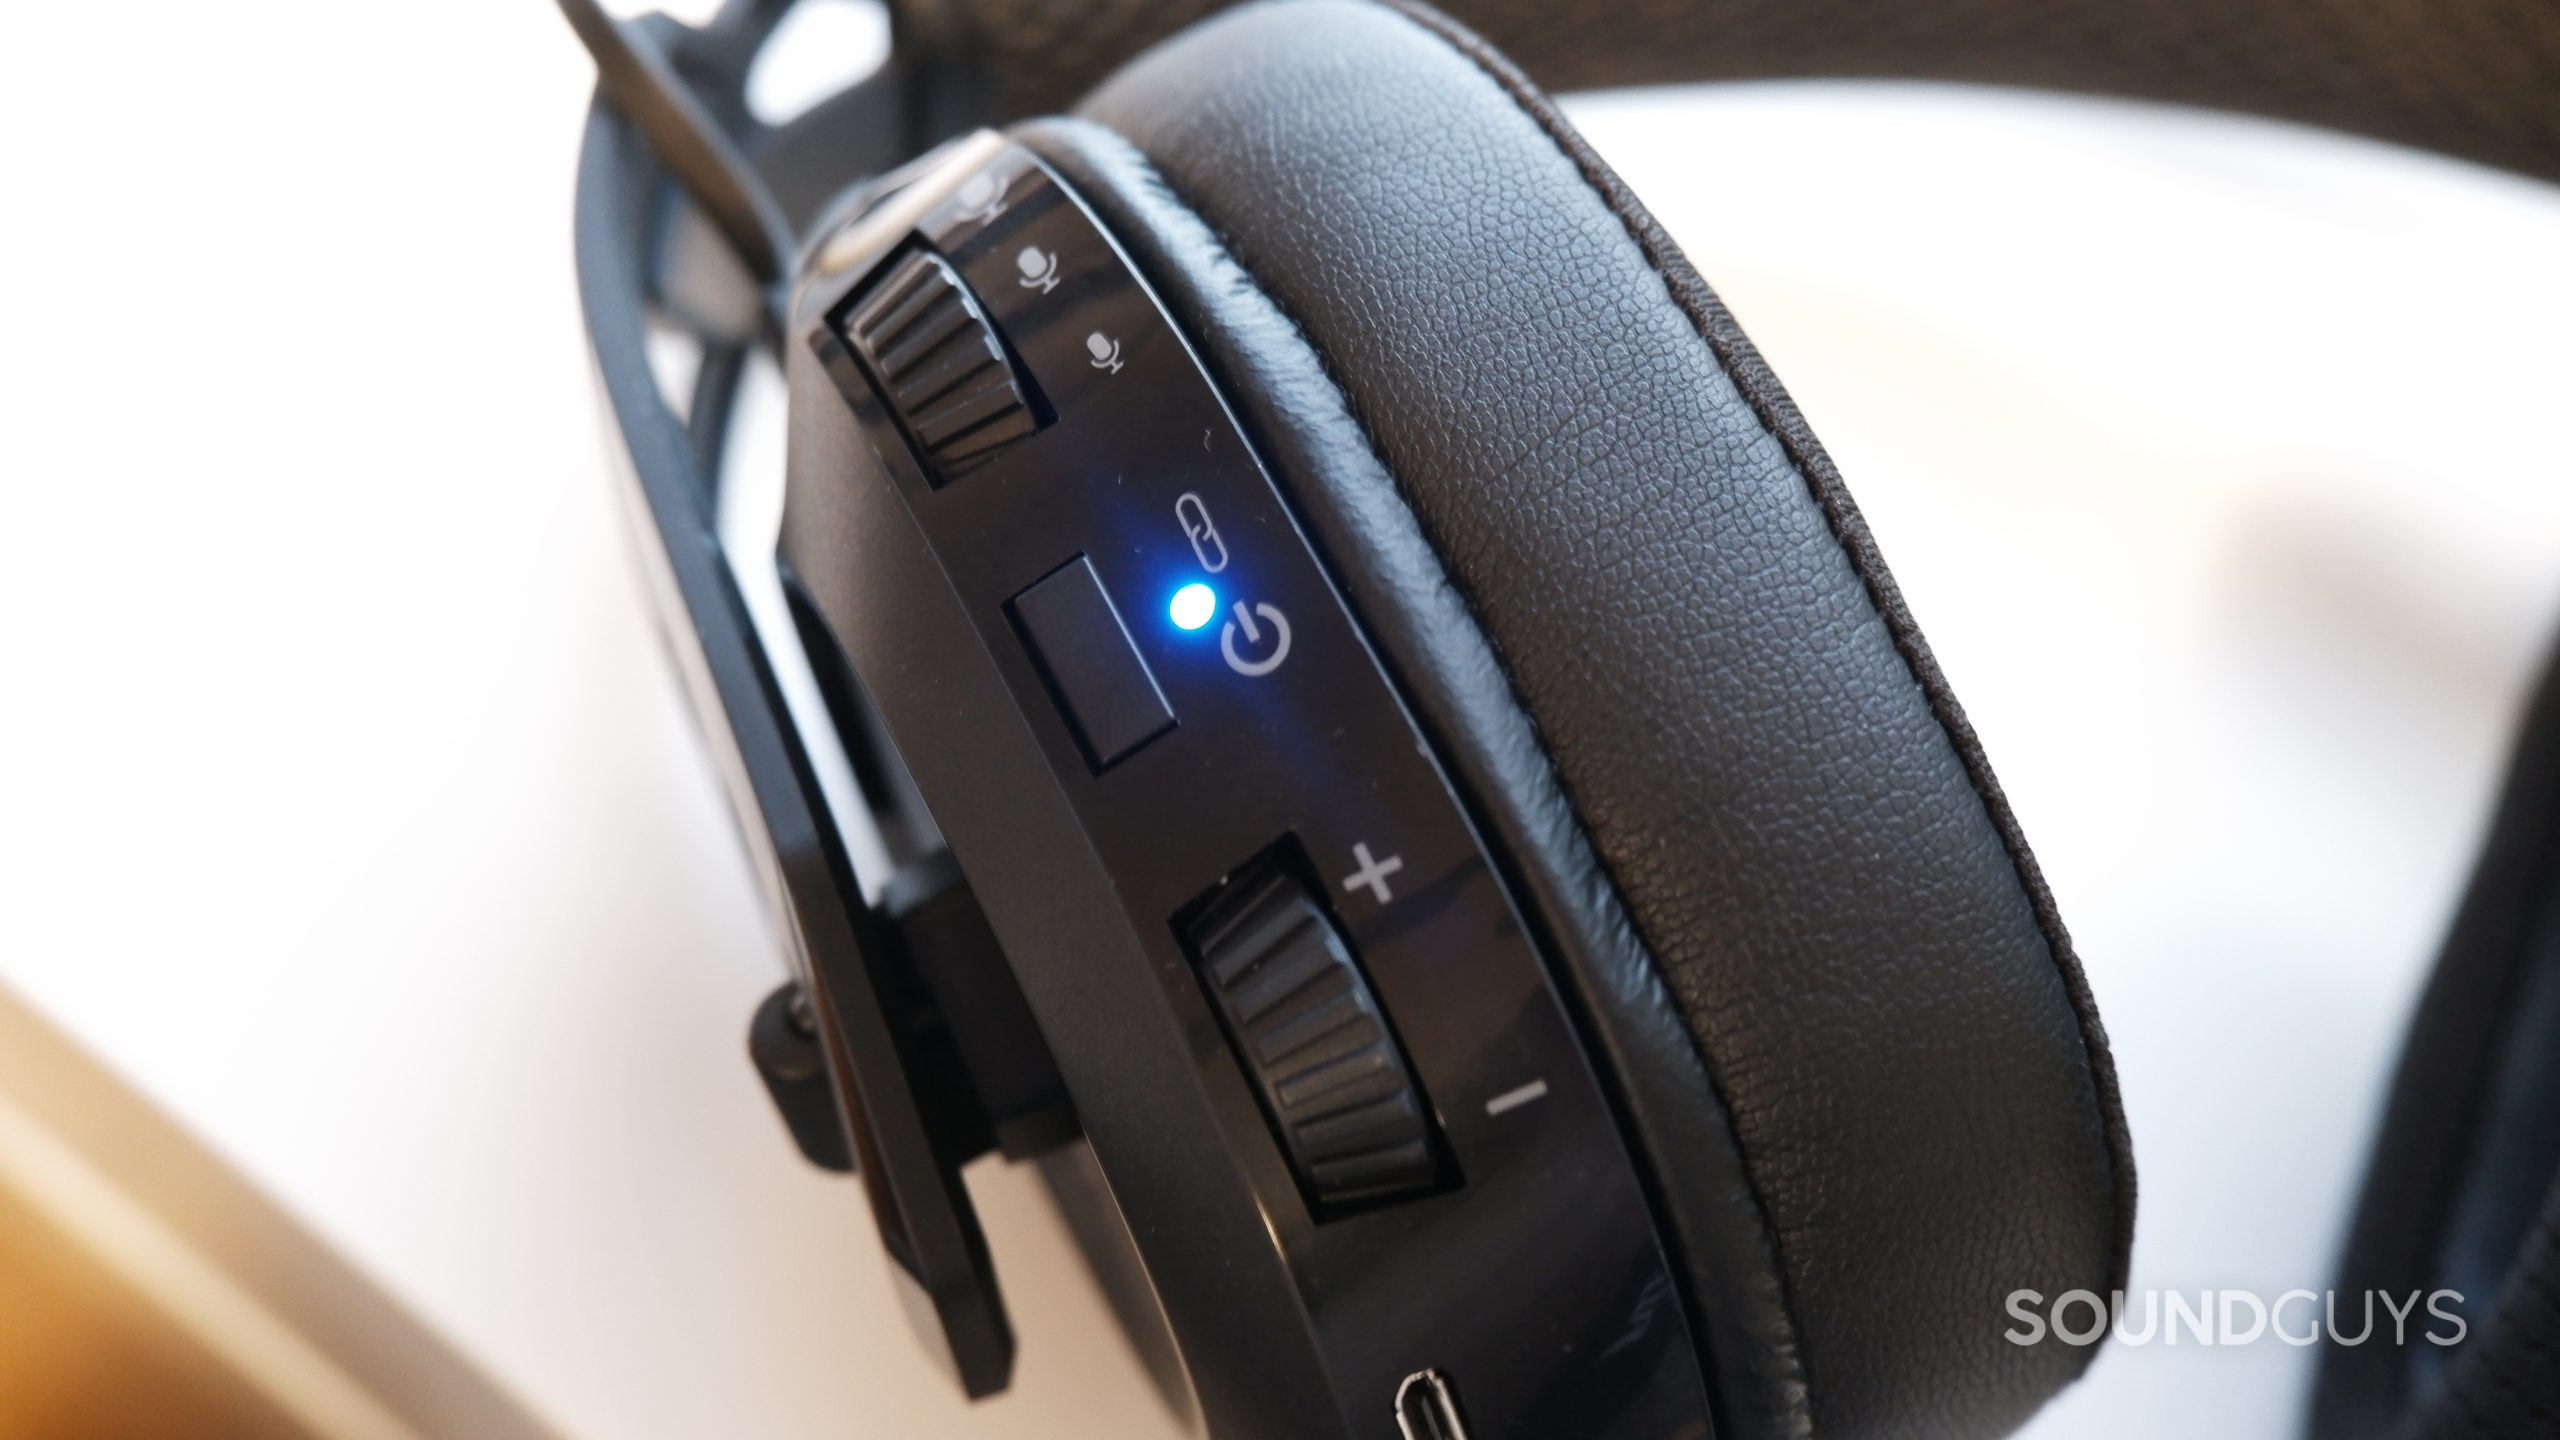 A close-up of the left ear cup on the RIG 700 PRO HS, showing the volume and microphone controls, as well as the on button, with the blue &quot;on&quot; light turned on.